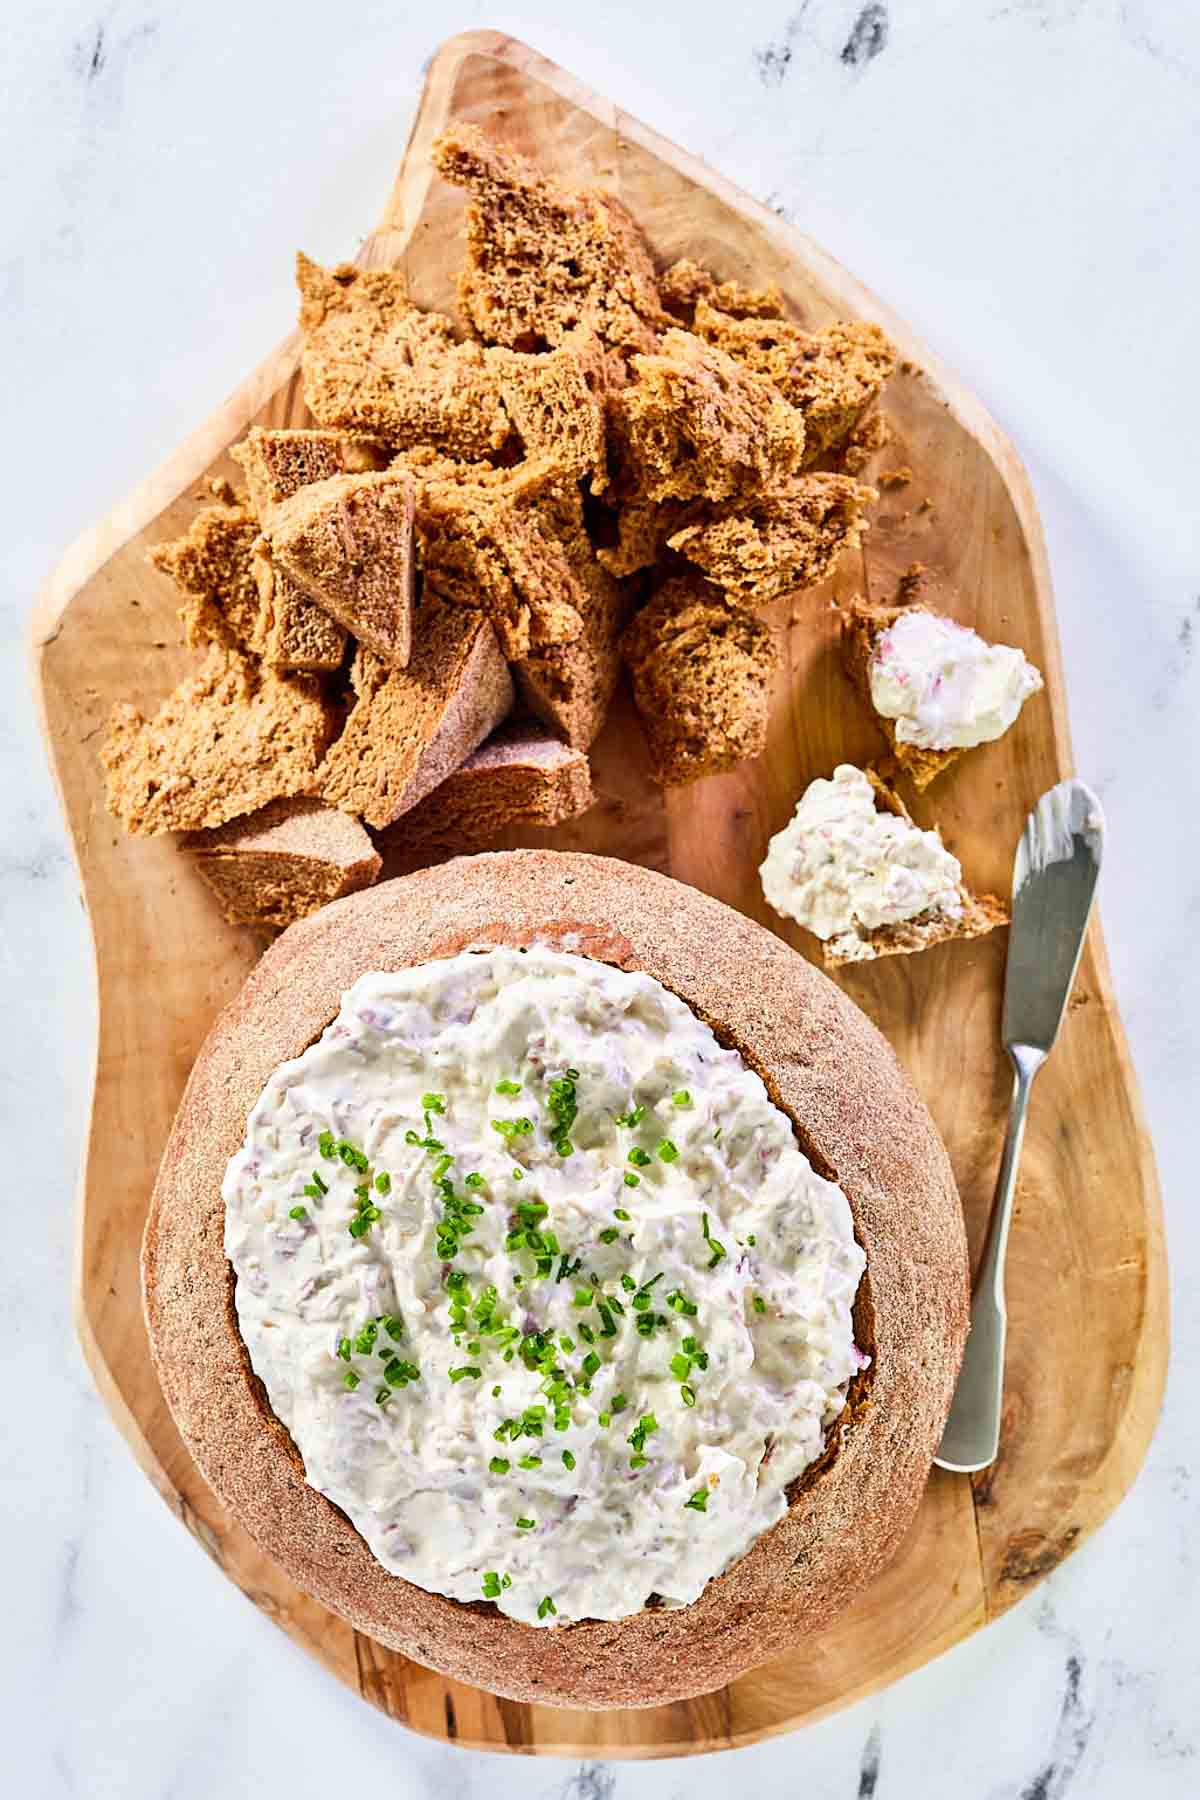 Rye bread dip and rye bread pieces on a serving platter.